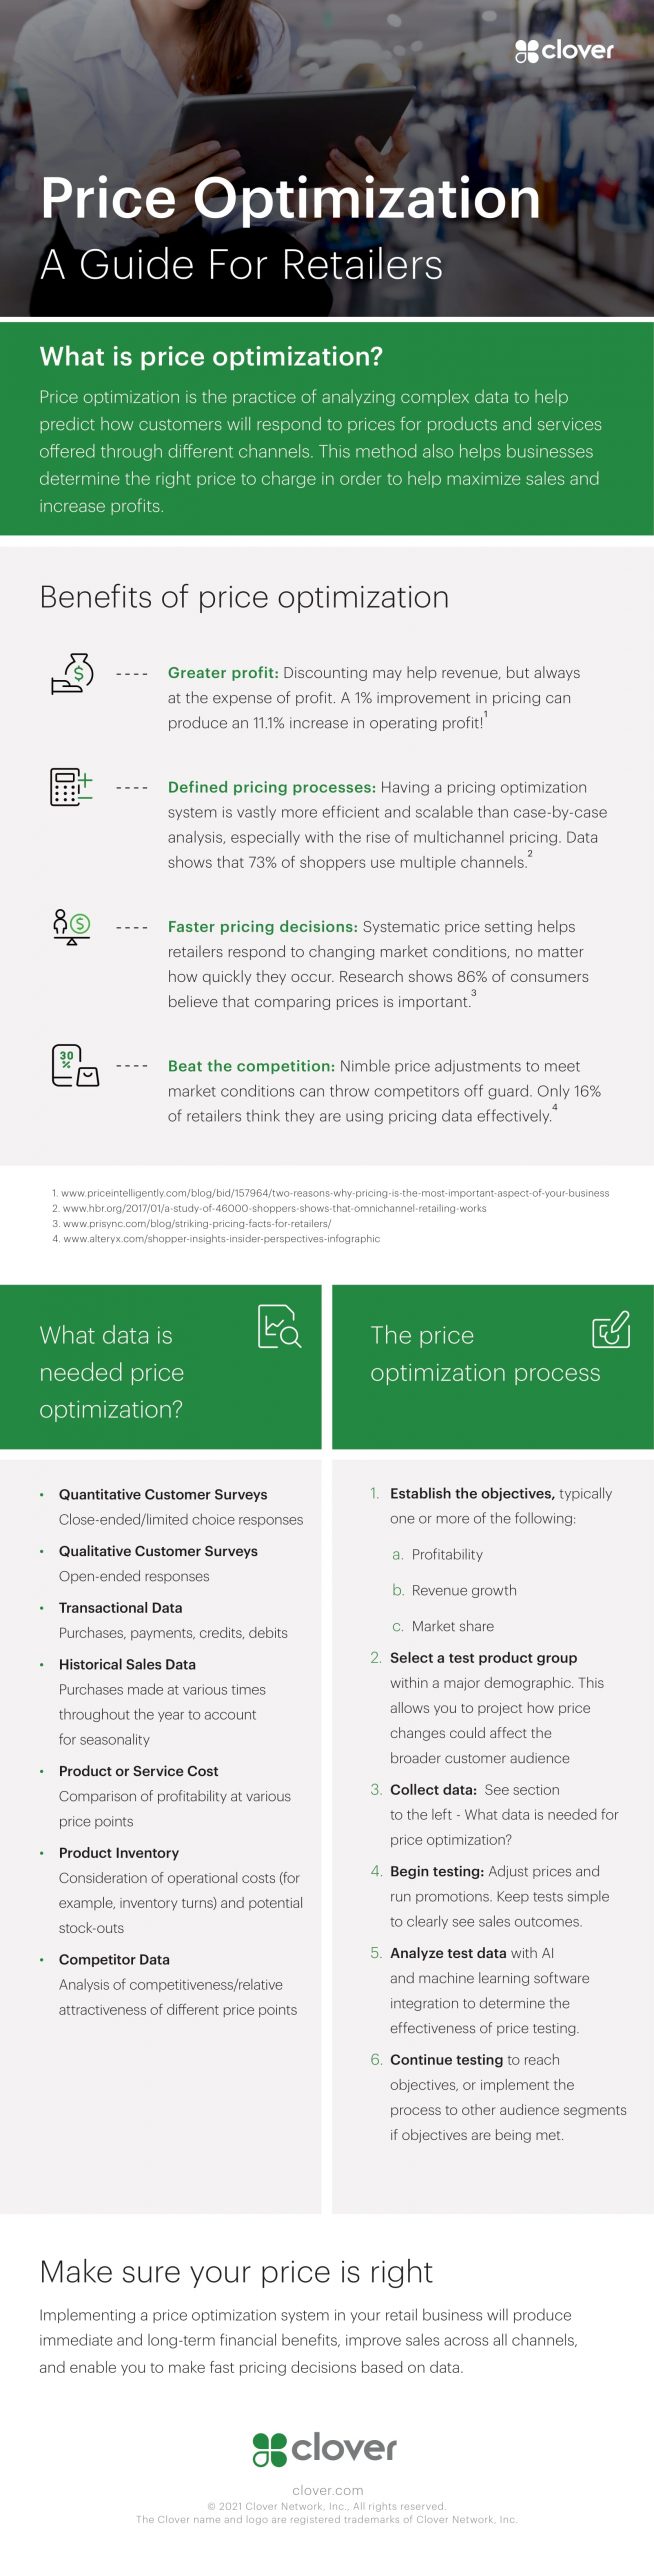 Price Optimization A Guide For Retailers